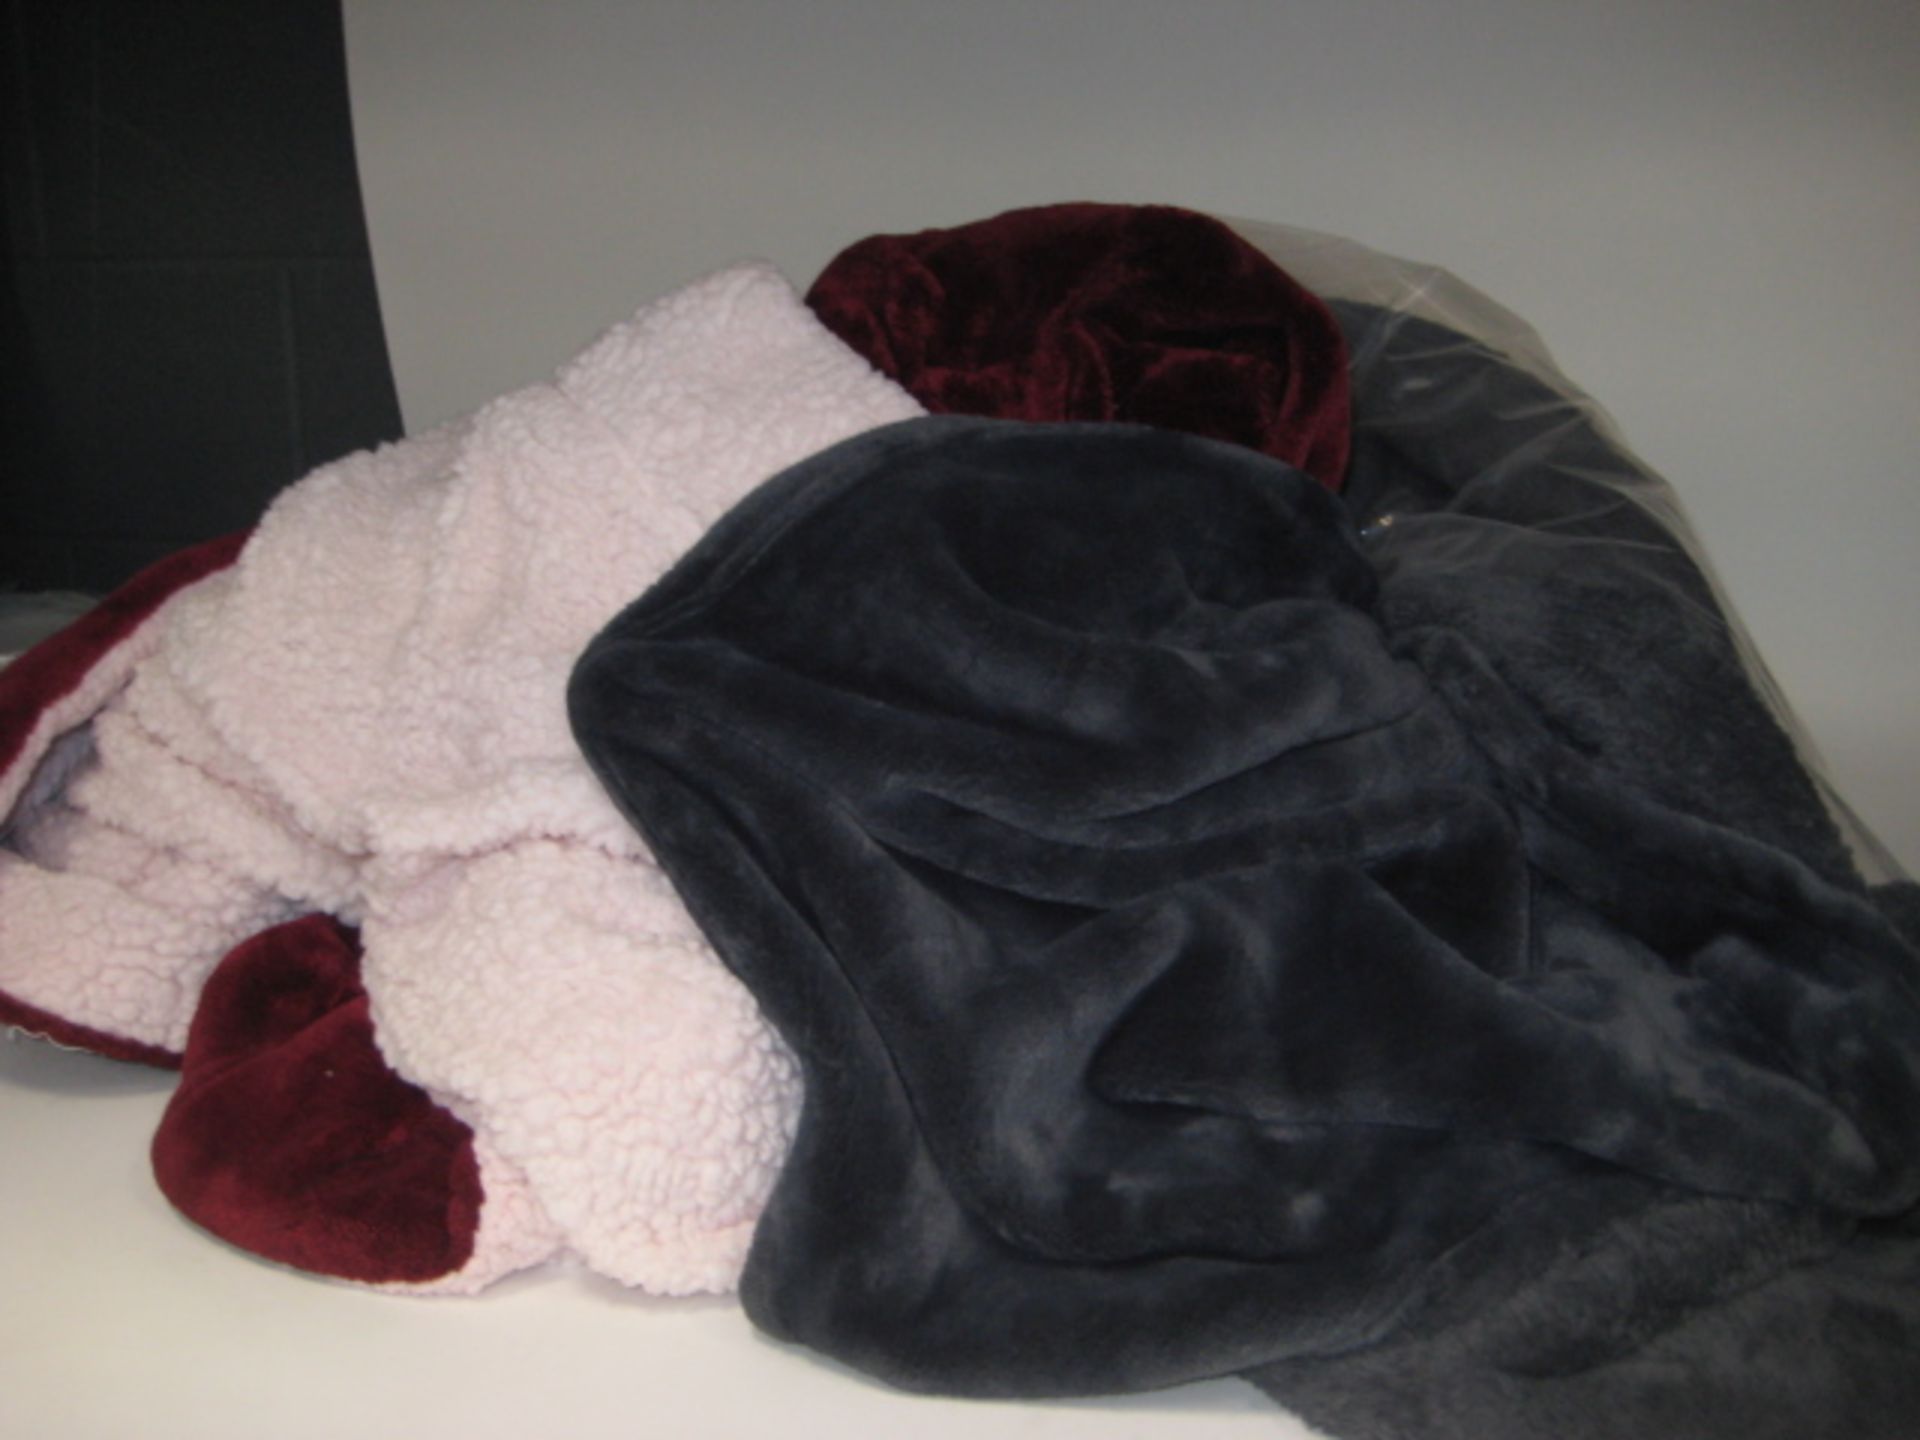 Bag containing 2 large throws; 1 in grey, 1 in red and pink